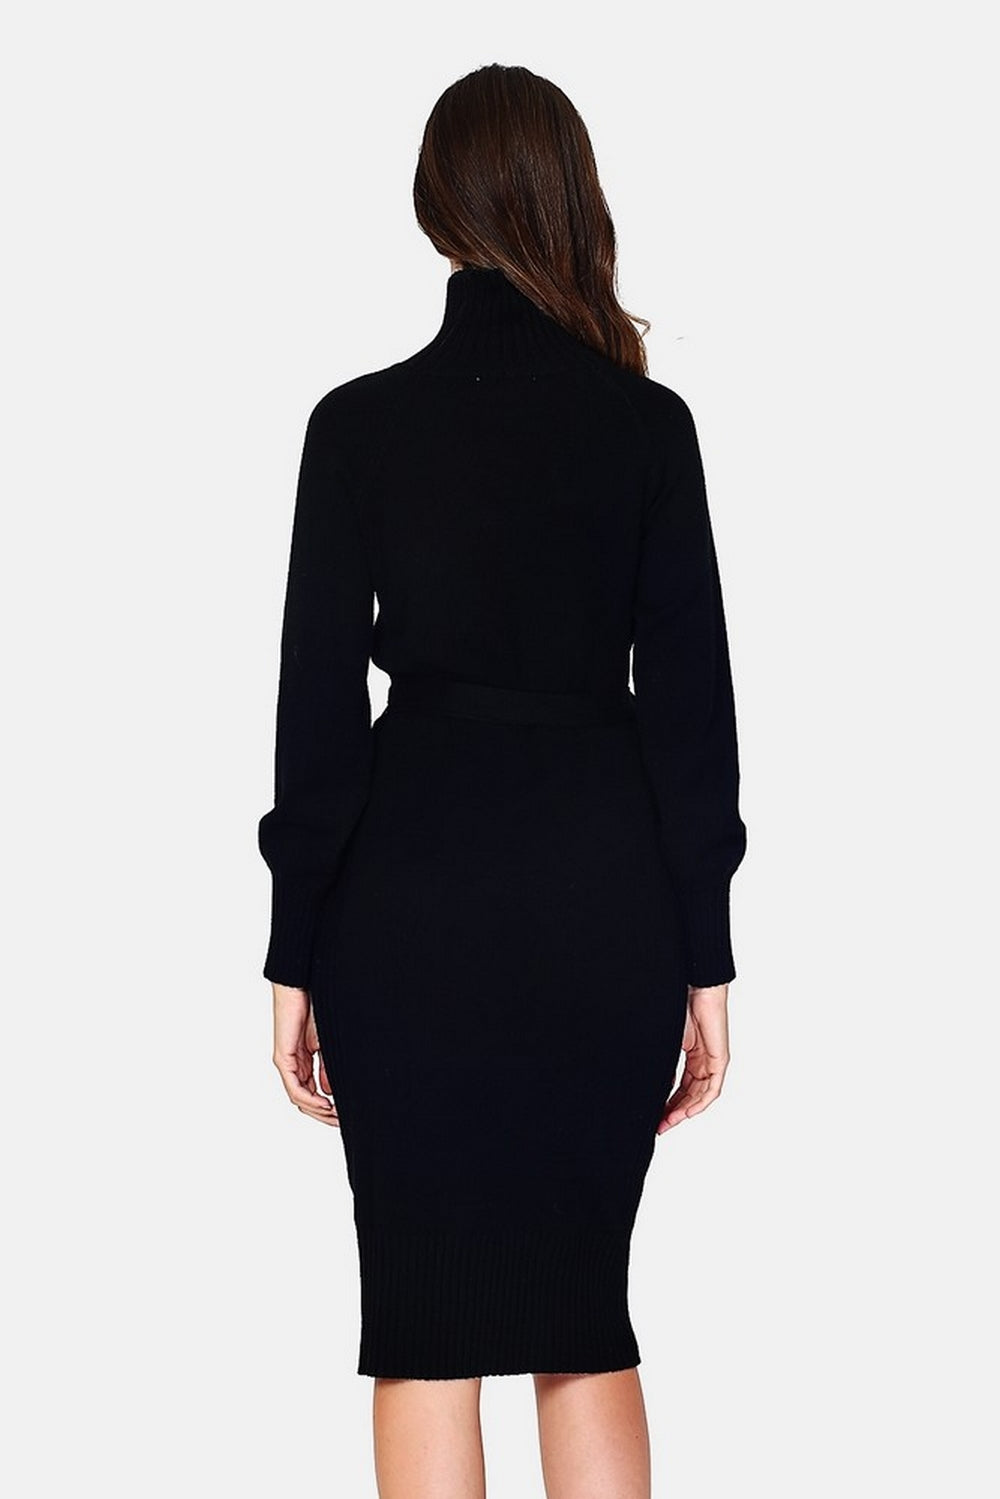 Long high neck dress closed by a button placket in front, rib knit on the sides with long slightly puff sleeved belt